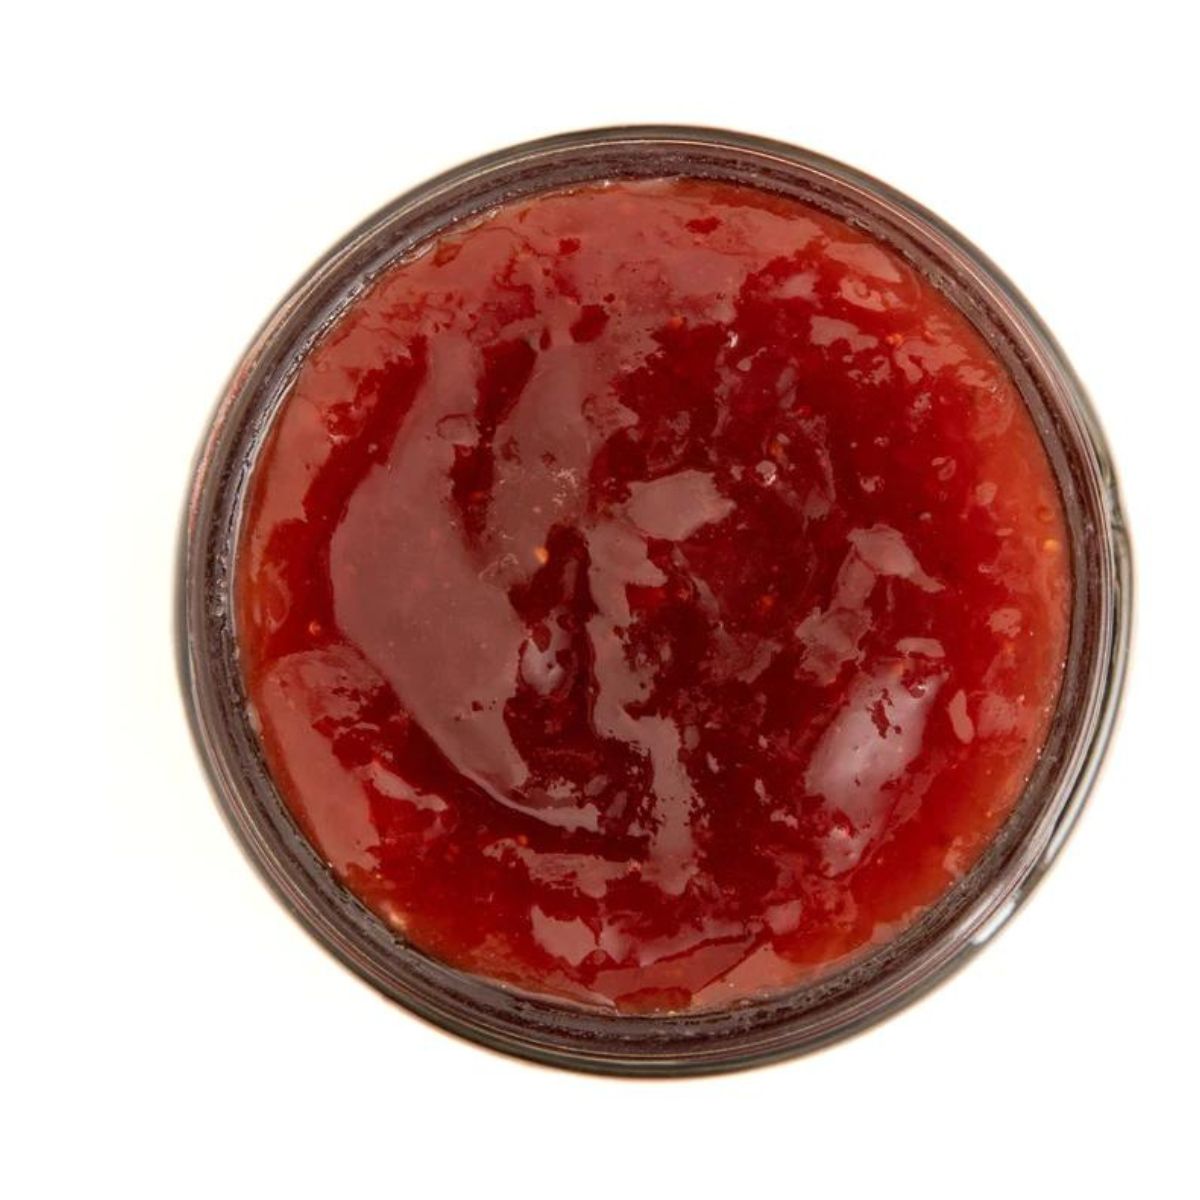 Wild Rose Infused Strawberry Jam- Wonderful with toast with tea.